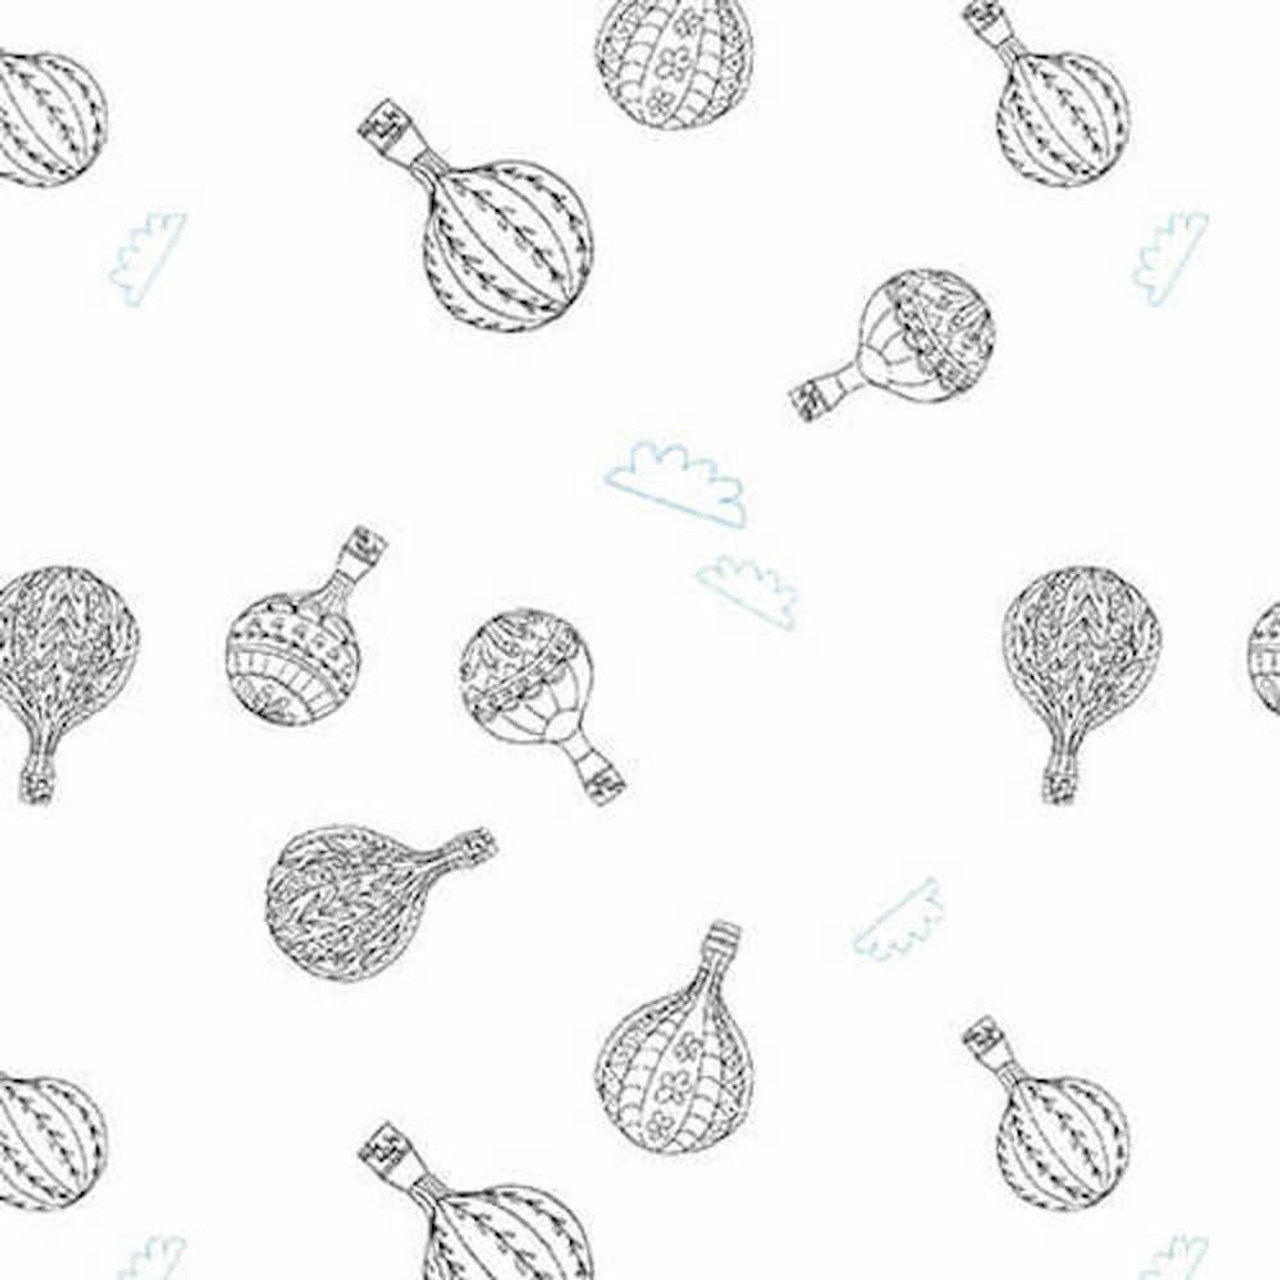 Blank Quilting Lower the Volume Hot Air Balloons White Cotton Fabric By The Yard